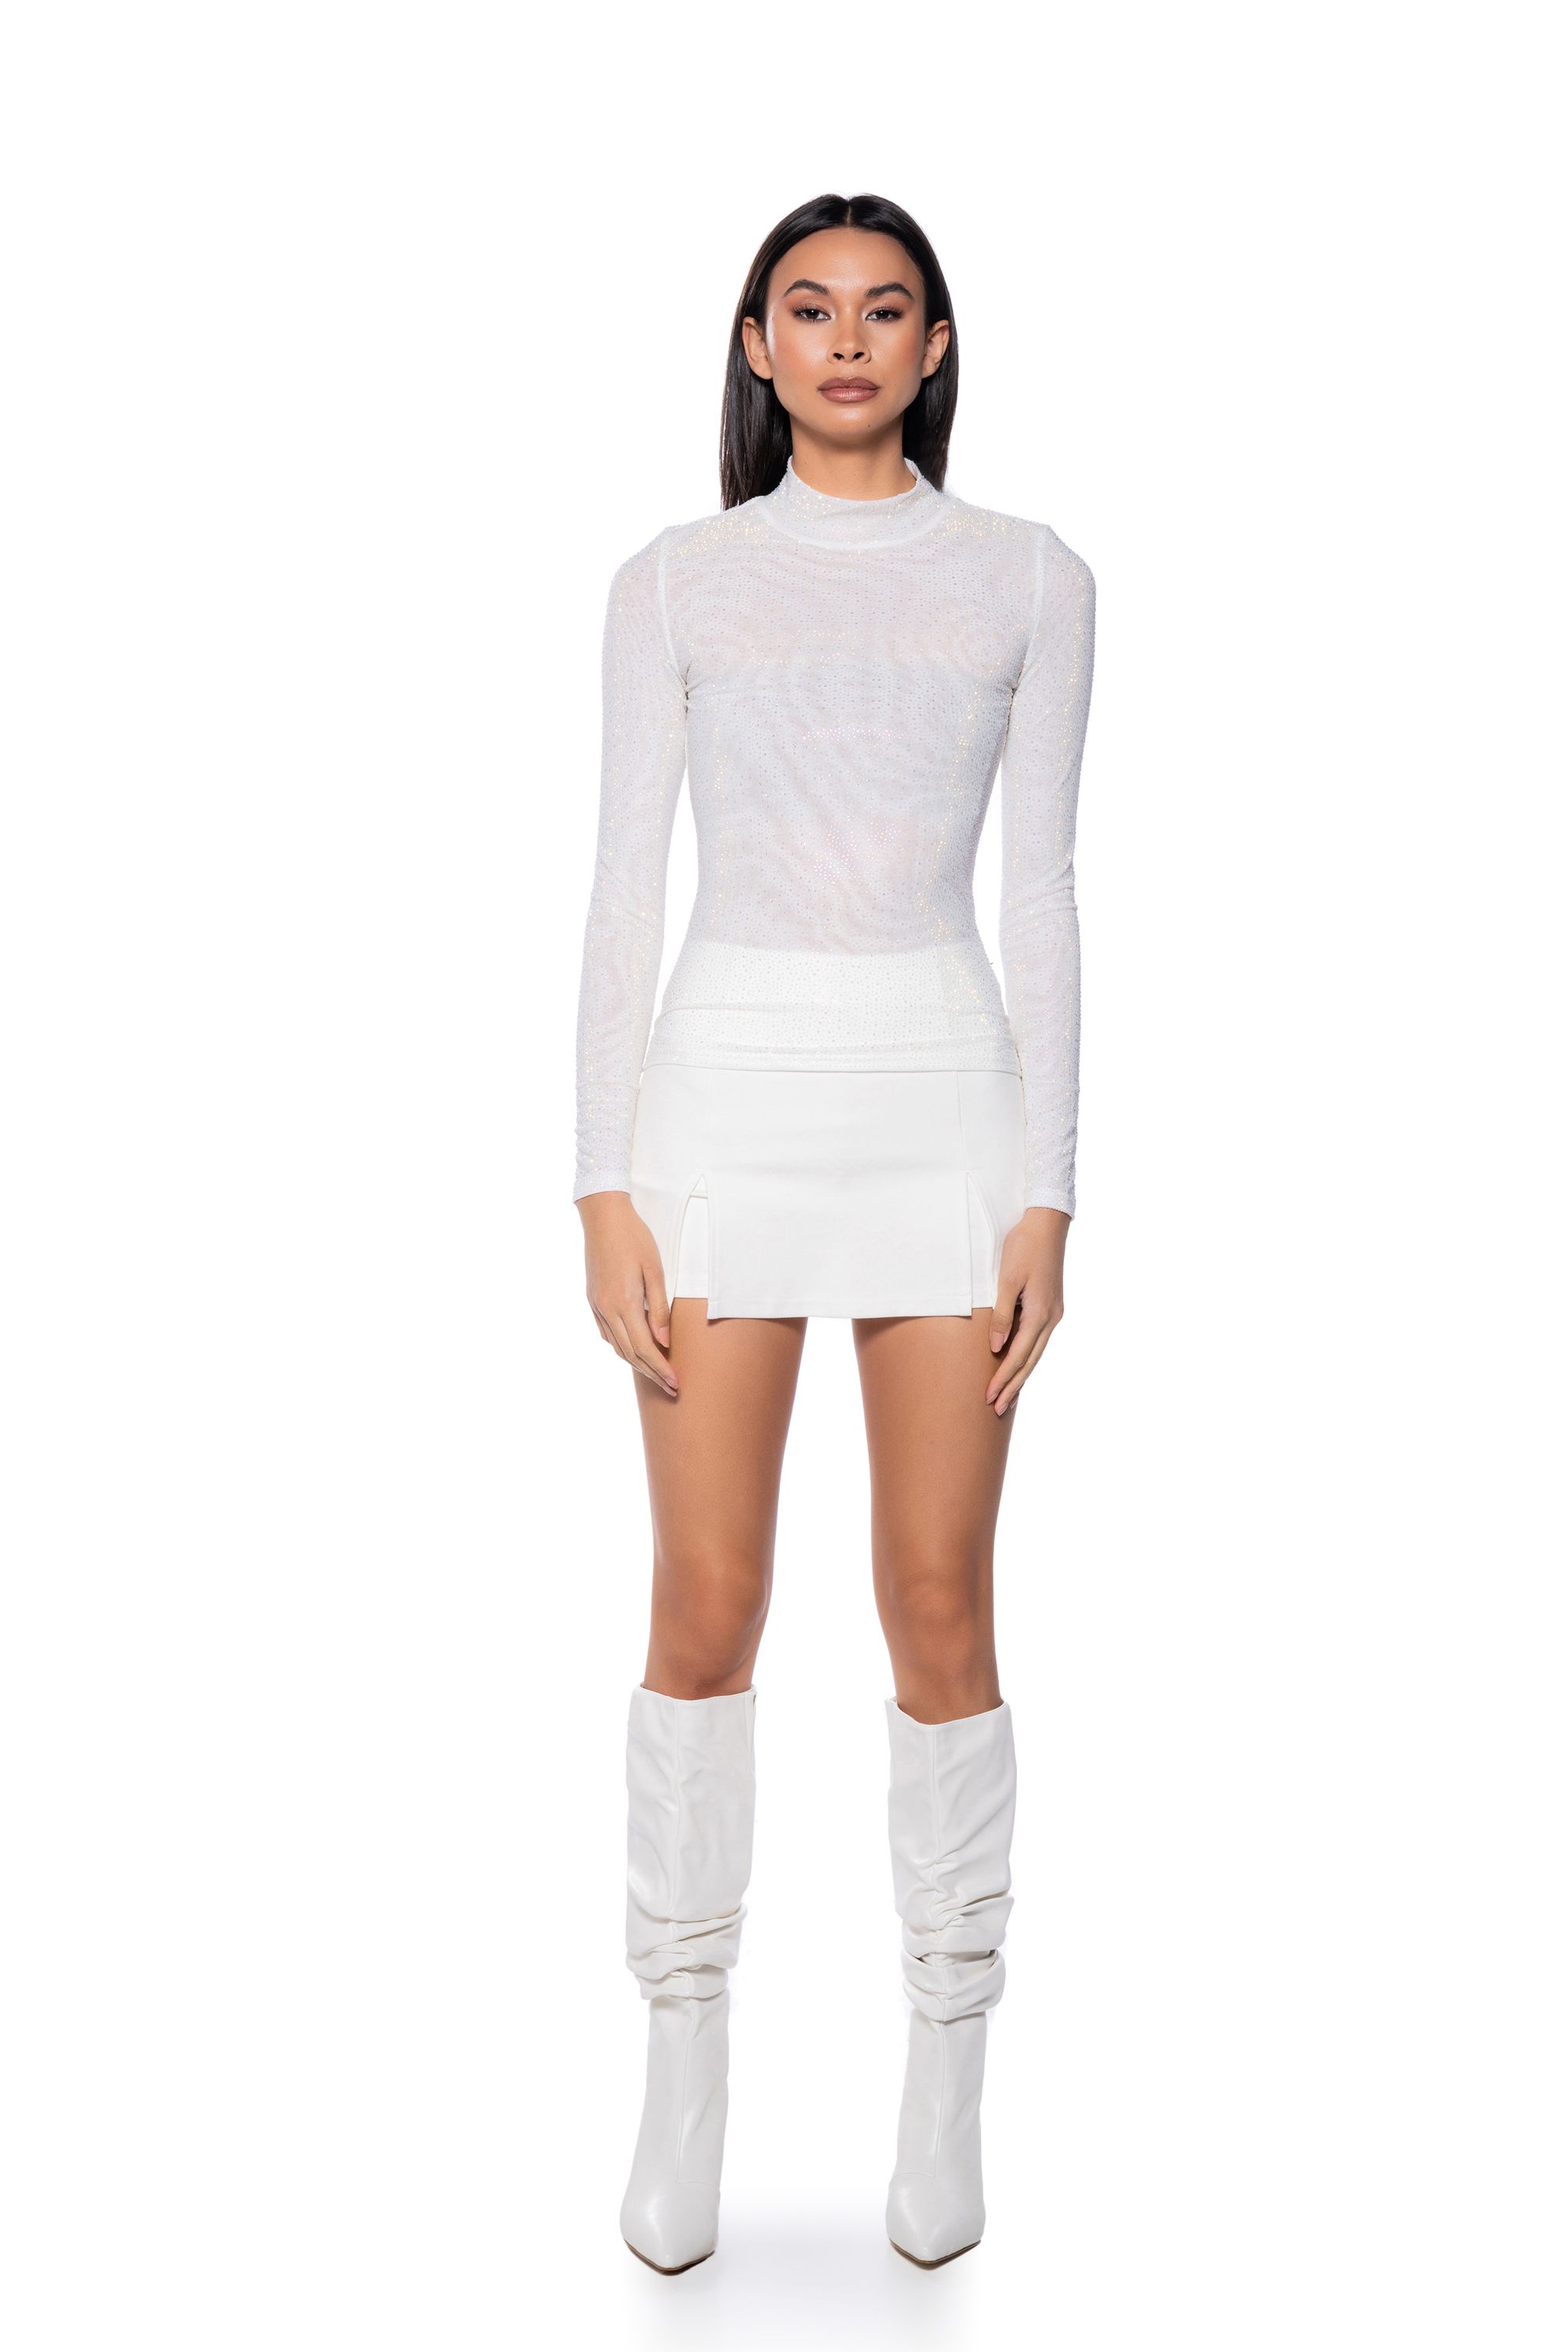 CLARISSA EMBELLISHED LONG SLEEVE MESH TOP IN WHITE